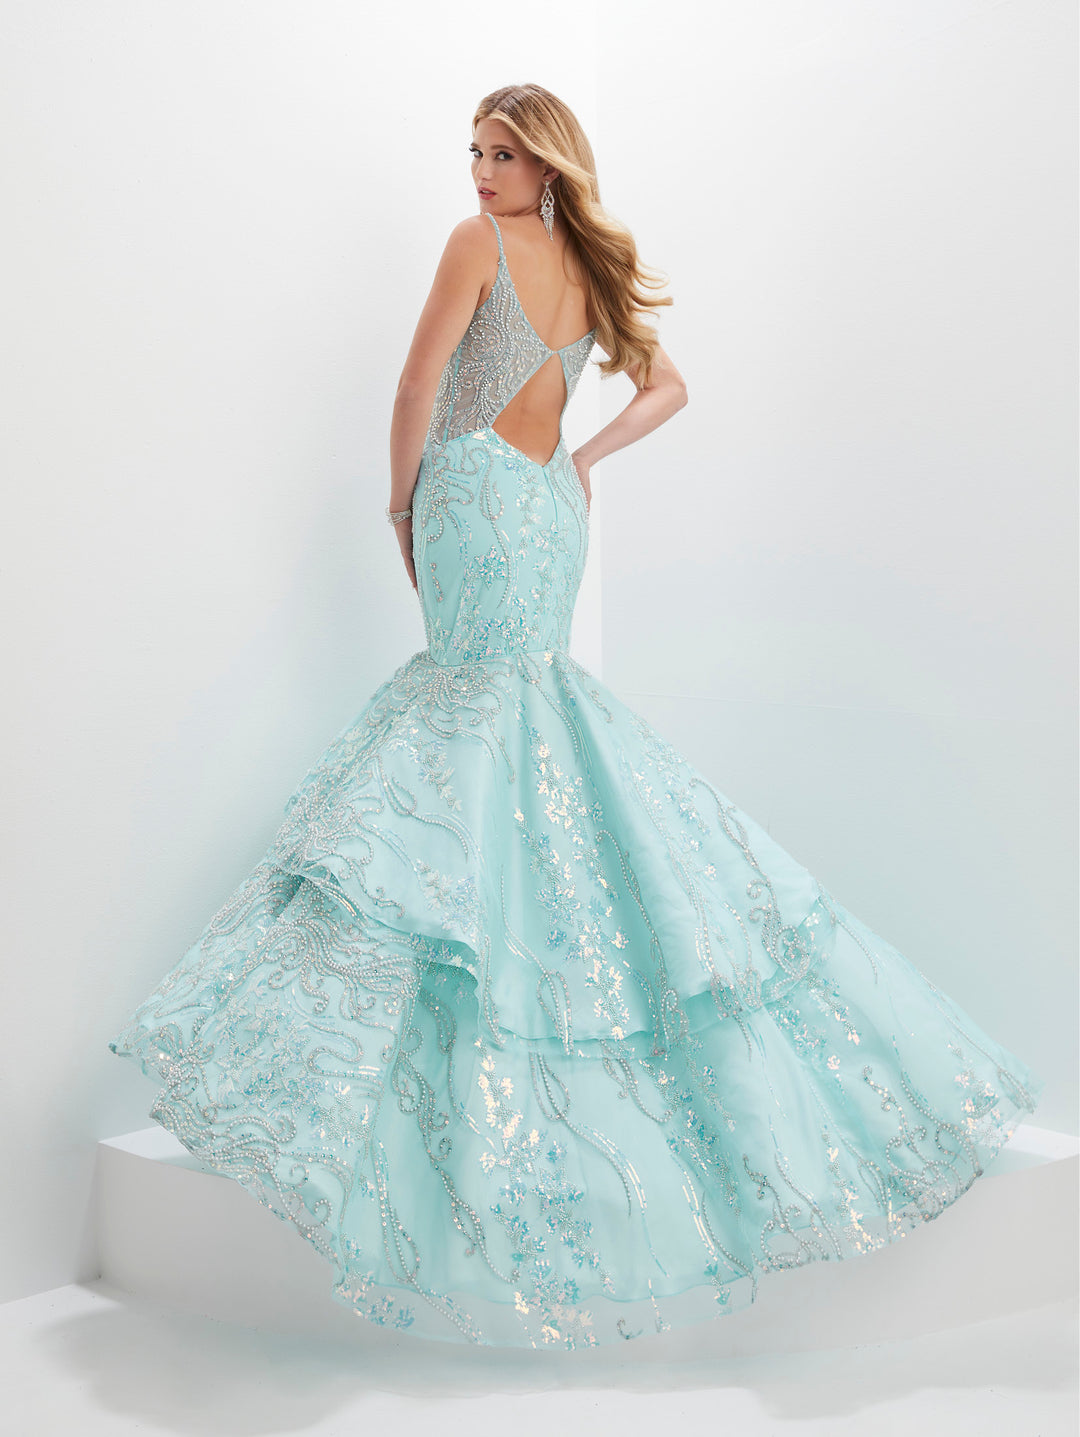 Sequin Print Tiered Mermaid Dress by Panoply 14150